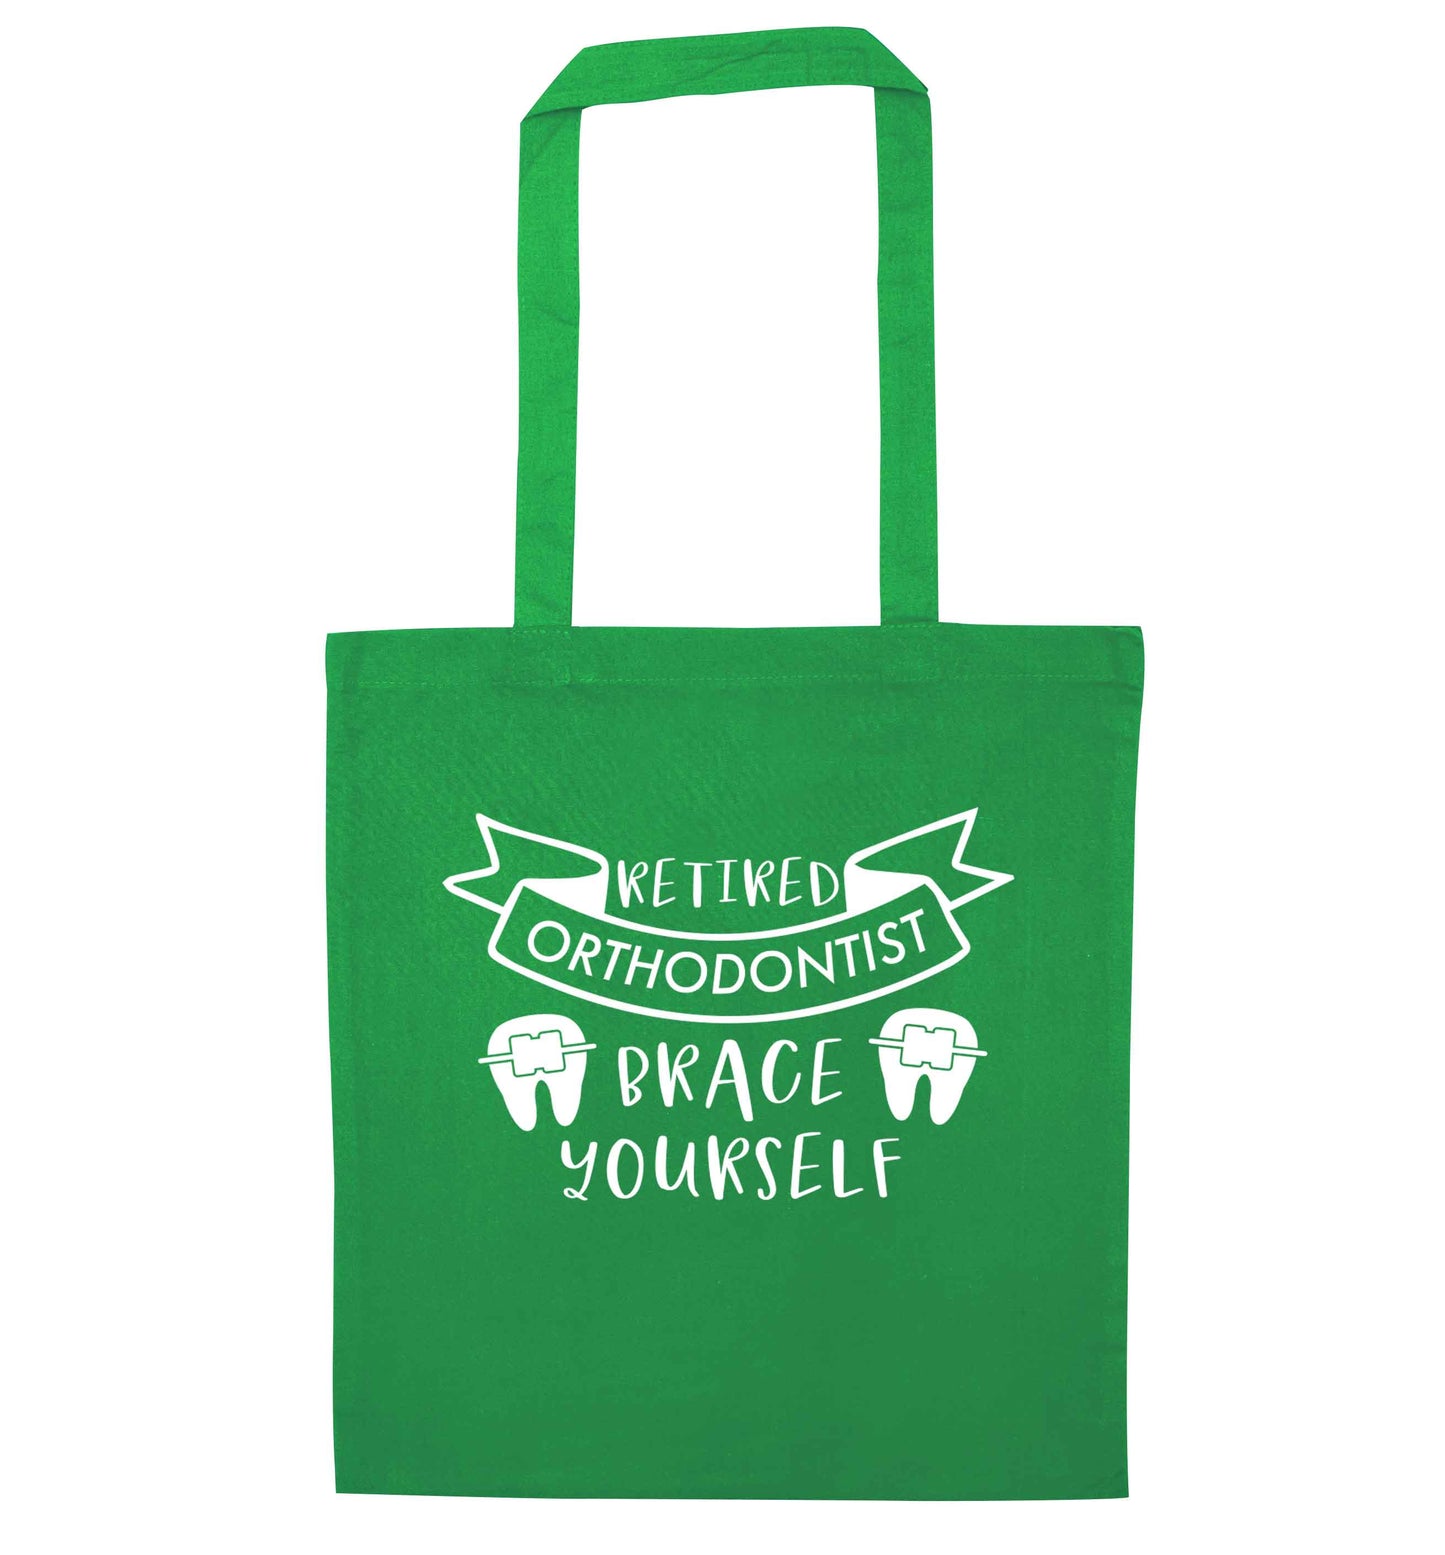 Retired orthodontist brace yourself green tote bag